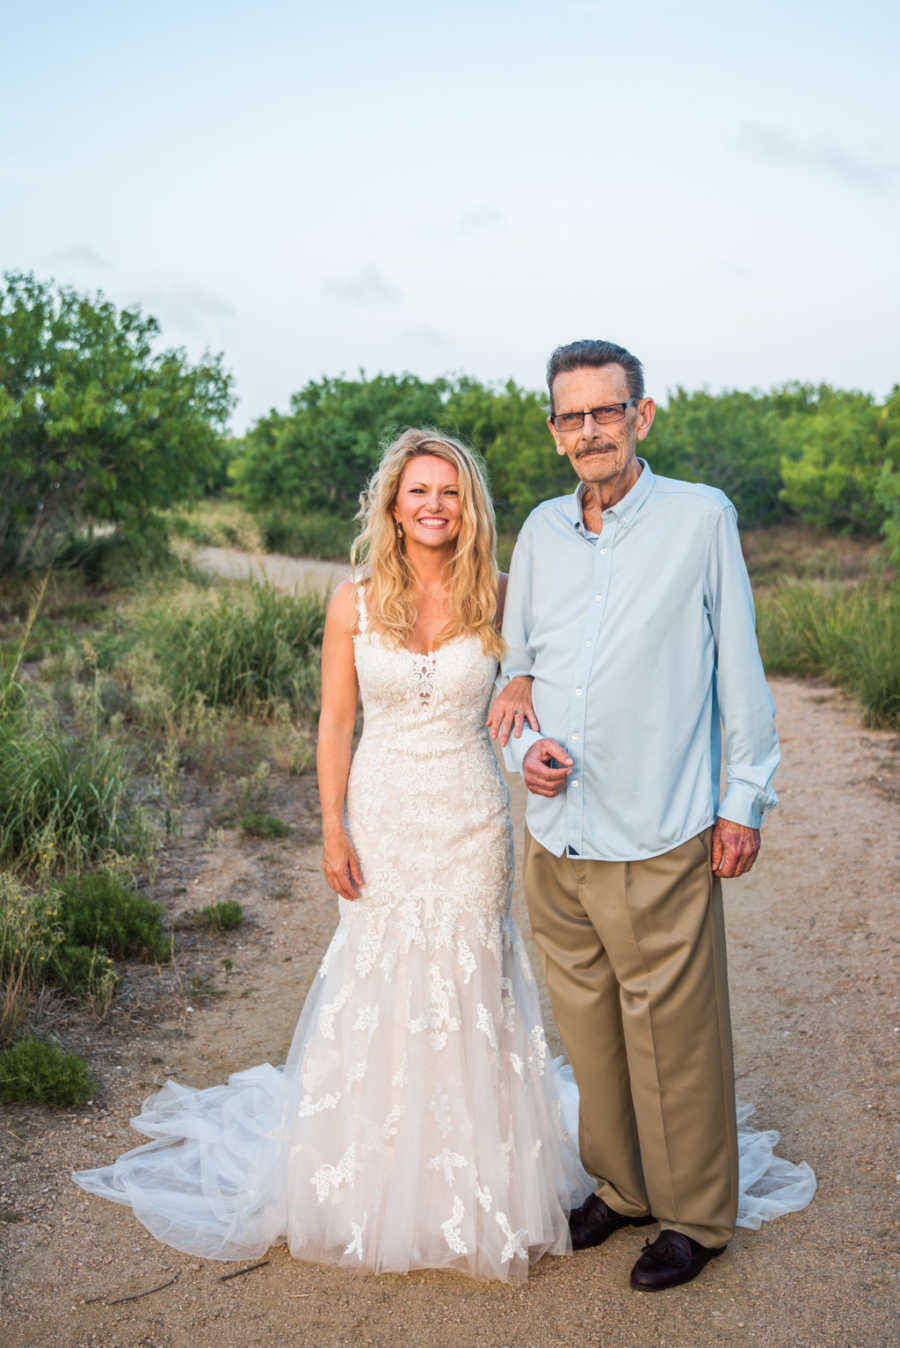 Woman in wedding gown stands on dirt path arm in arm with father who has cancer